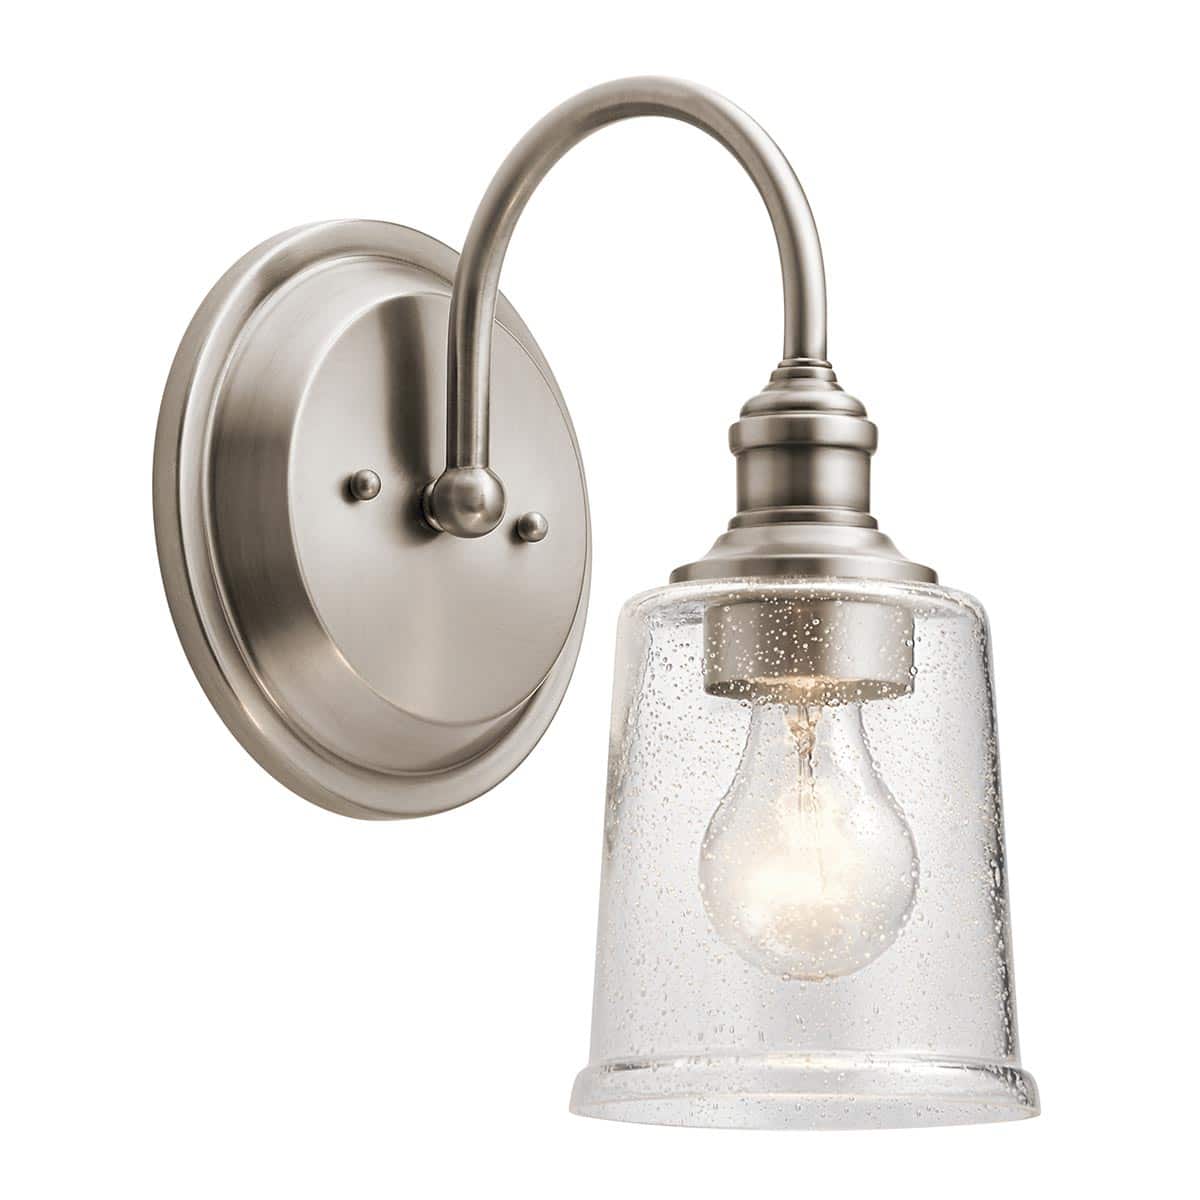 Kichler Waverly Classic Pewter Single Wall Light Seeded Glass Shade